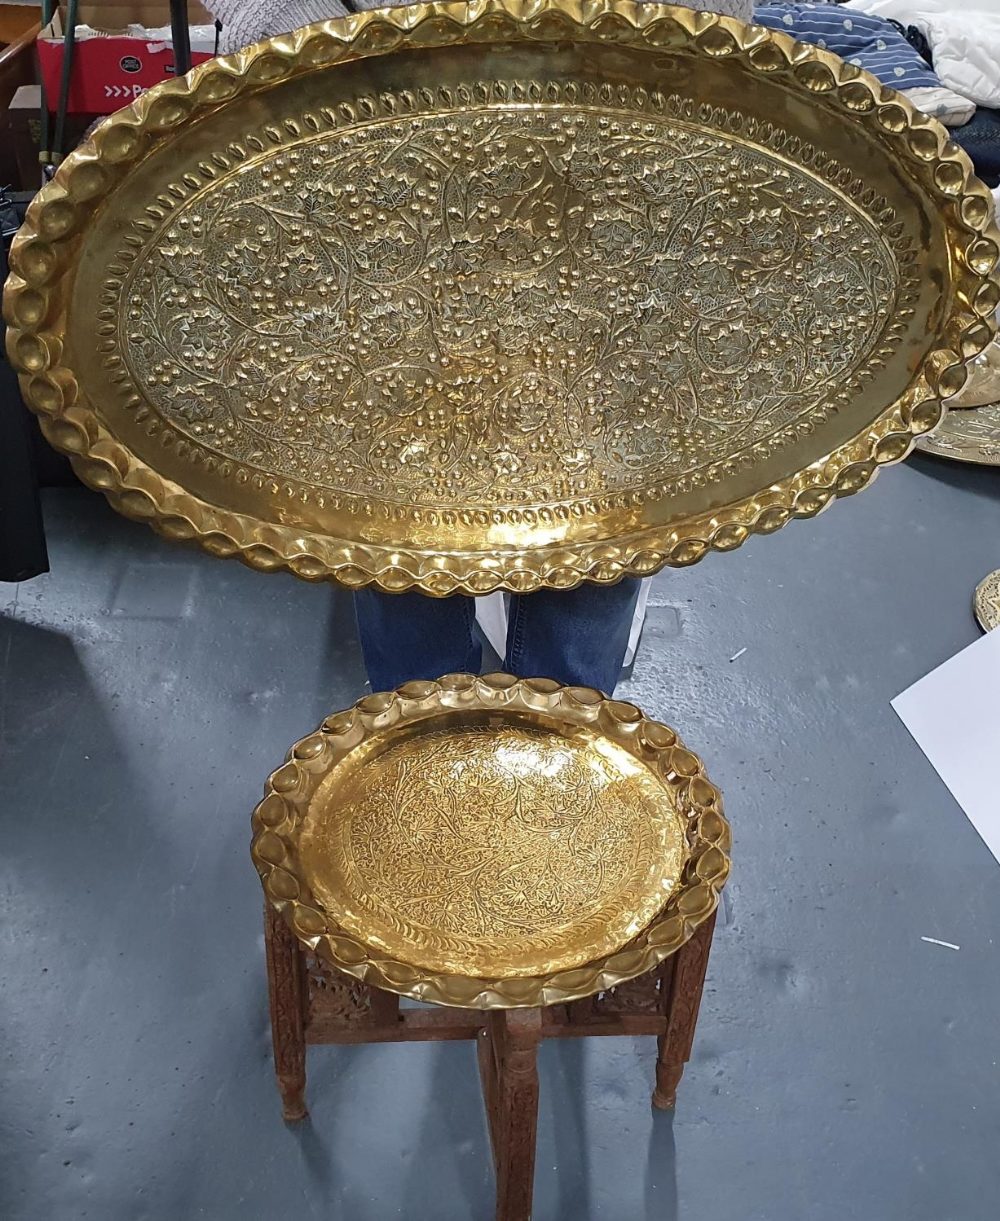 Large, very heavy, oval brass hanging, display tray together with a small ornately hammered small